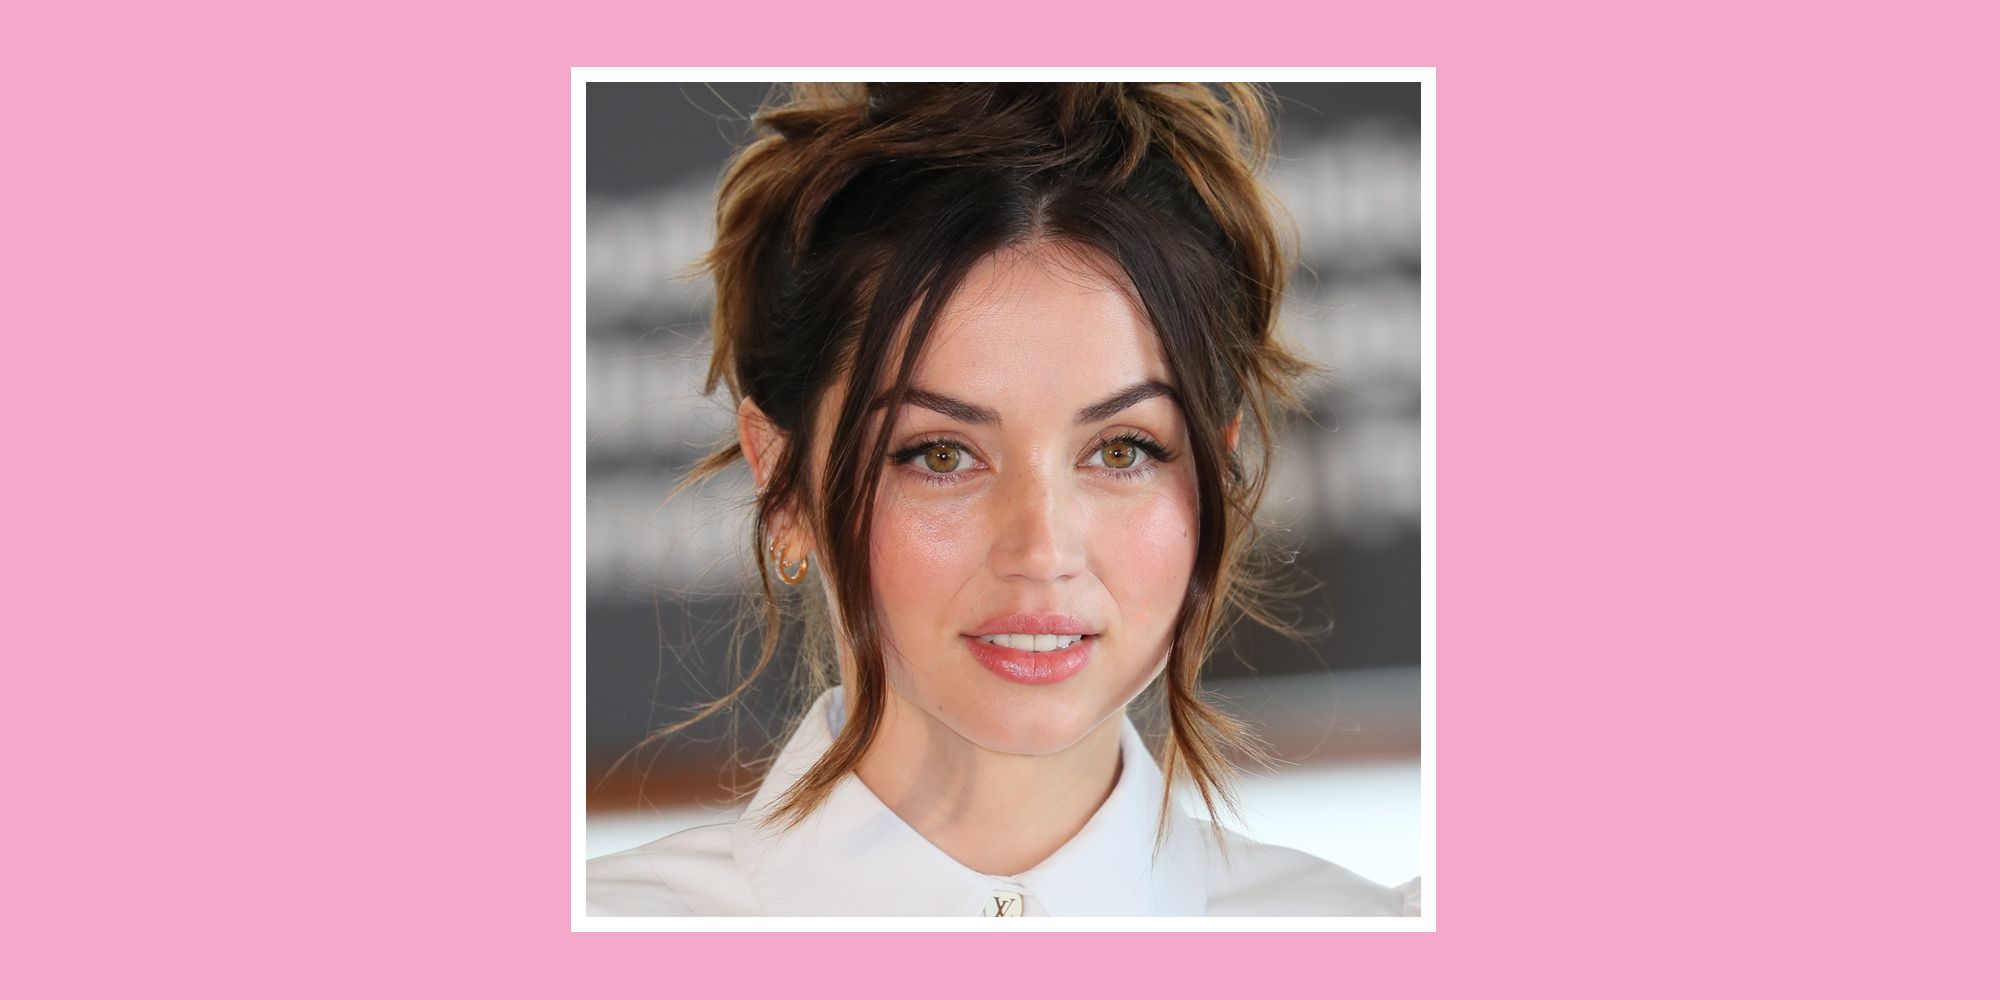 Ana de Armas, 33, On Her Favorite Skincare Products And More hq image